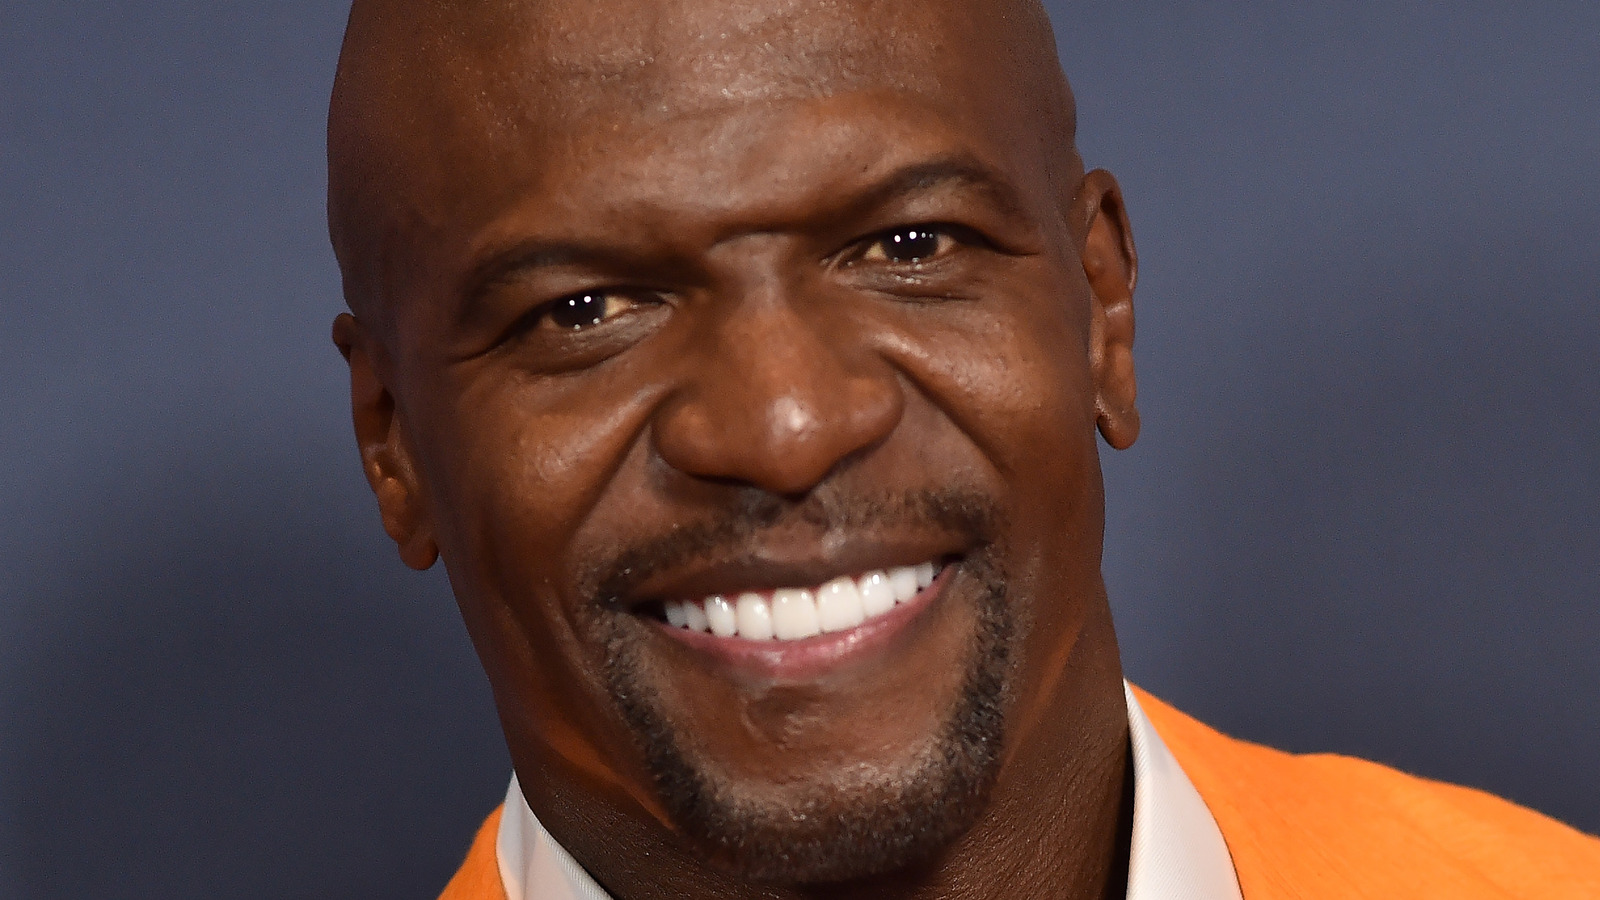 The Truth About Terry Crews' Career In The NFL